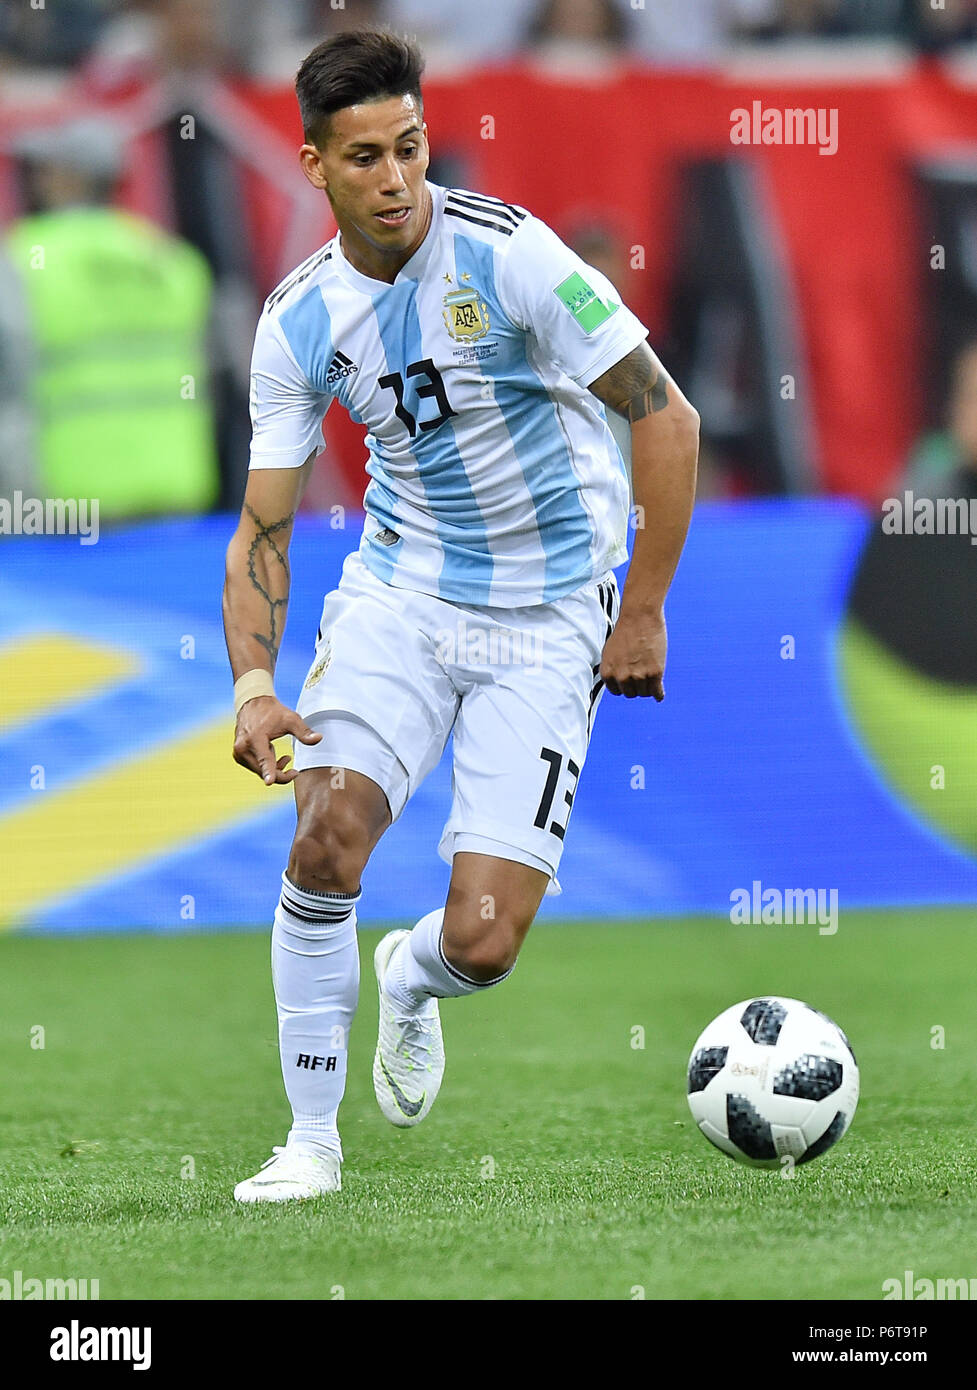 NIZHNIY NOVGOROD, RUSSIA - JUNE 21: Maximiliano Meza of Argentina in action during the 2018 FIFA World Cup Russia group D match between Argentina and Croatia at Nizhniy Novgorod Stadium on June 21, 2018 in Nizhniy Novgorod, Russia. (Photo by Lukasz Laskowski/PressFocus/MB Media) Stock Photo